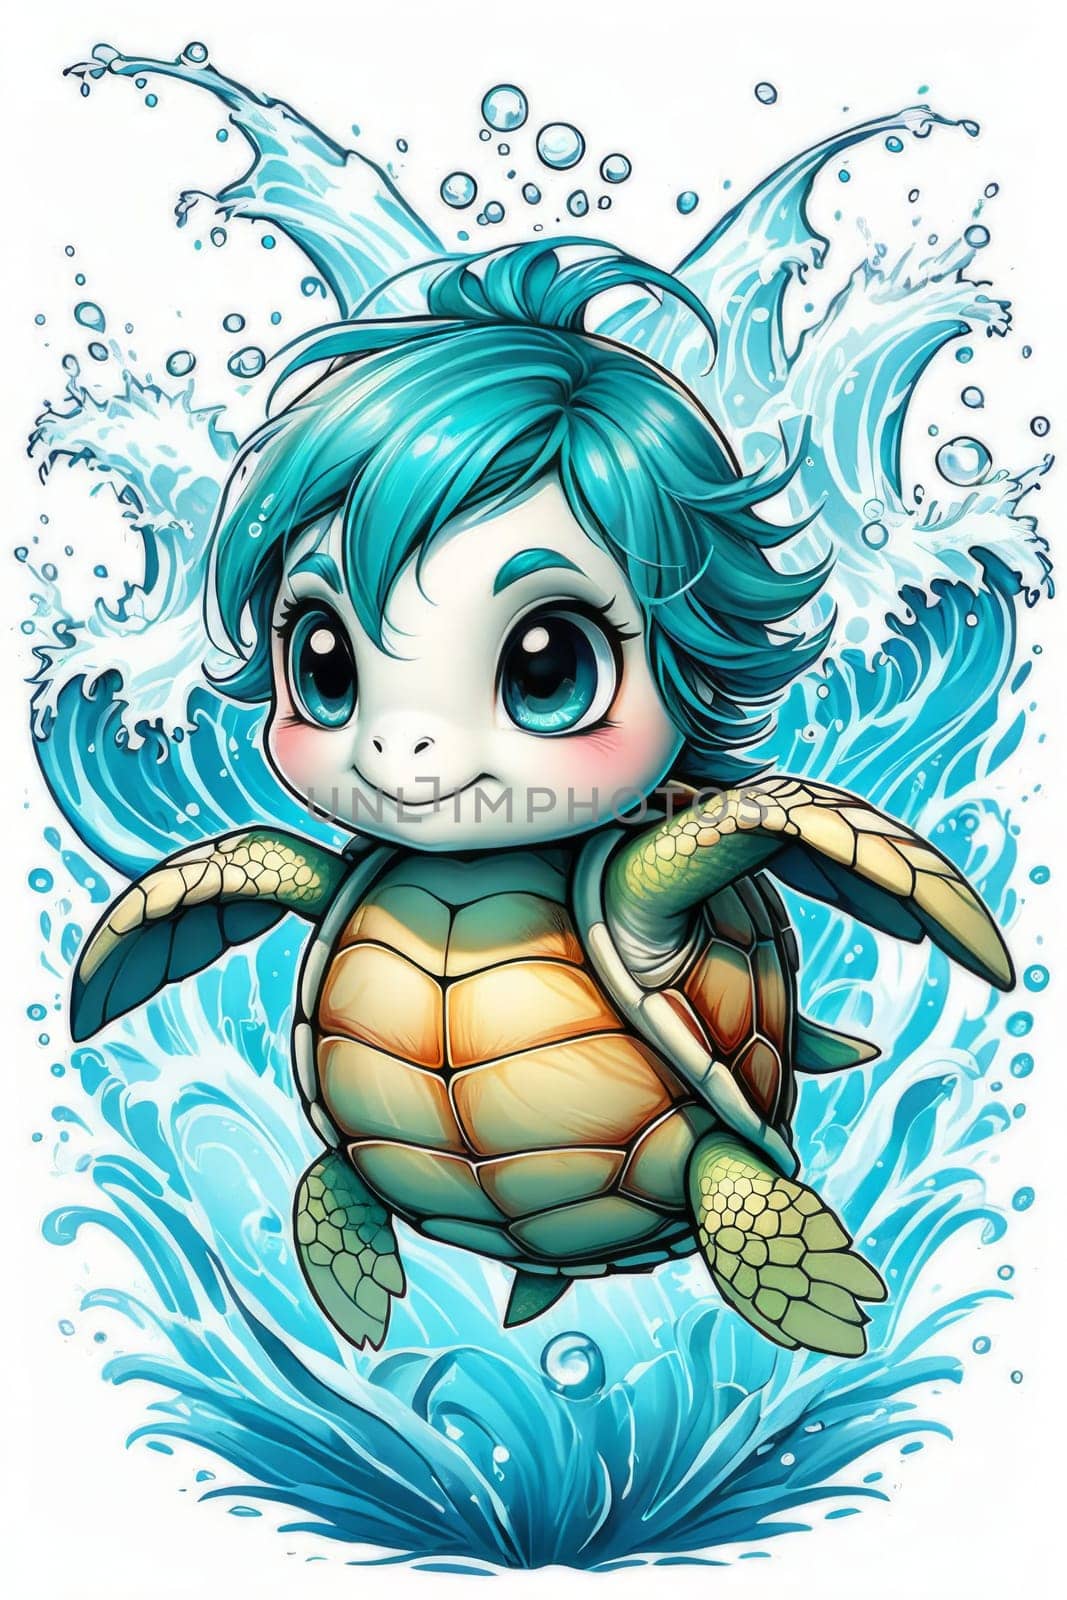 Cartoon girl with turtle, whimsical and playful scene where girl appears cheerful, turtle seems content in endearing position. For Tshirt design, poster, postcard, childrens book, tourism, stationery